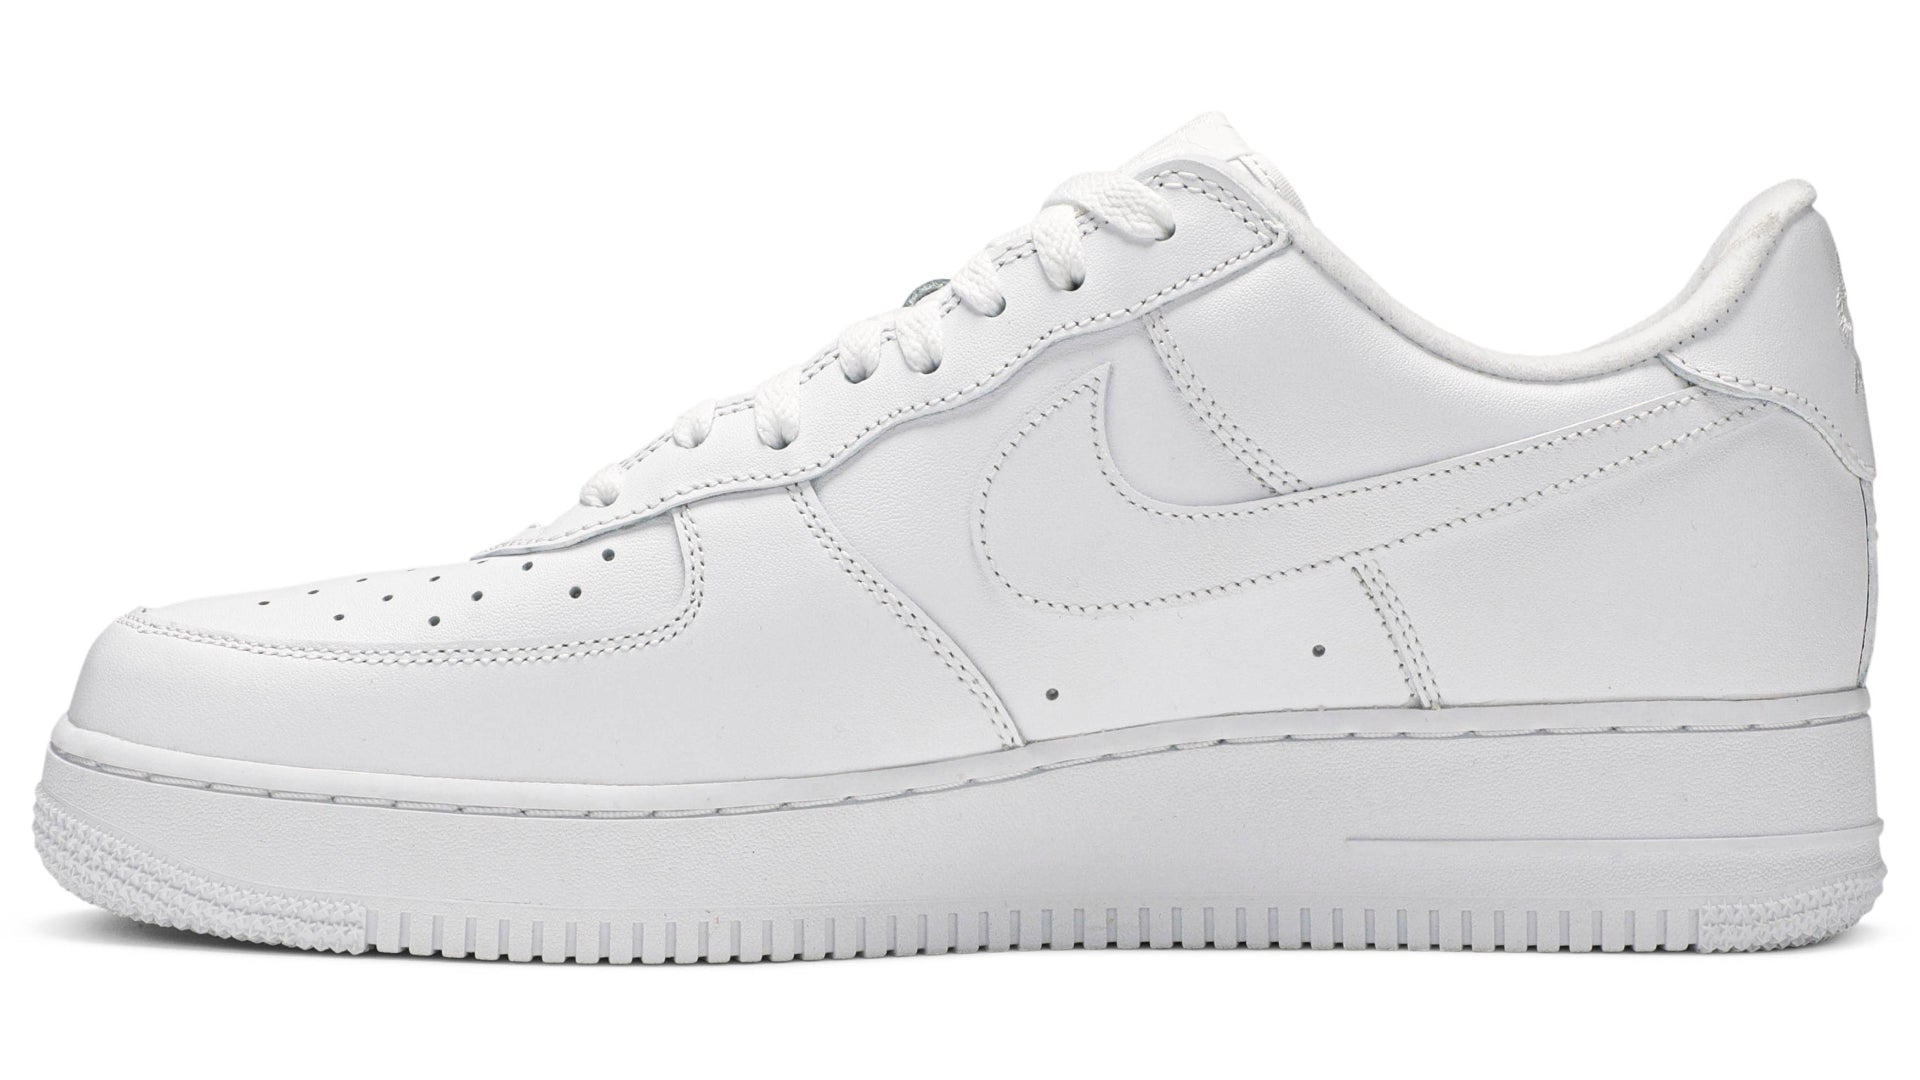 Nike Air Force 1 Low Supreme White Size 8.5/11/13 $250-$288